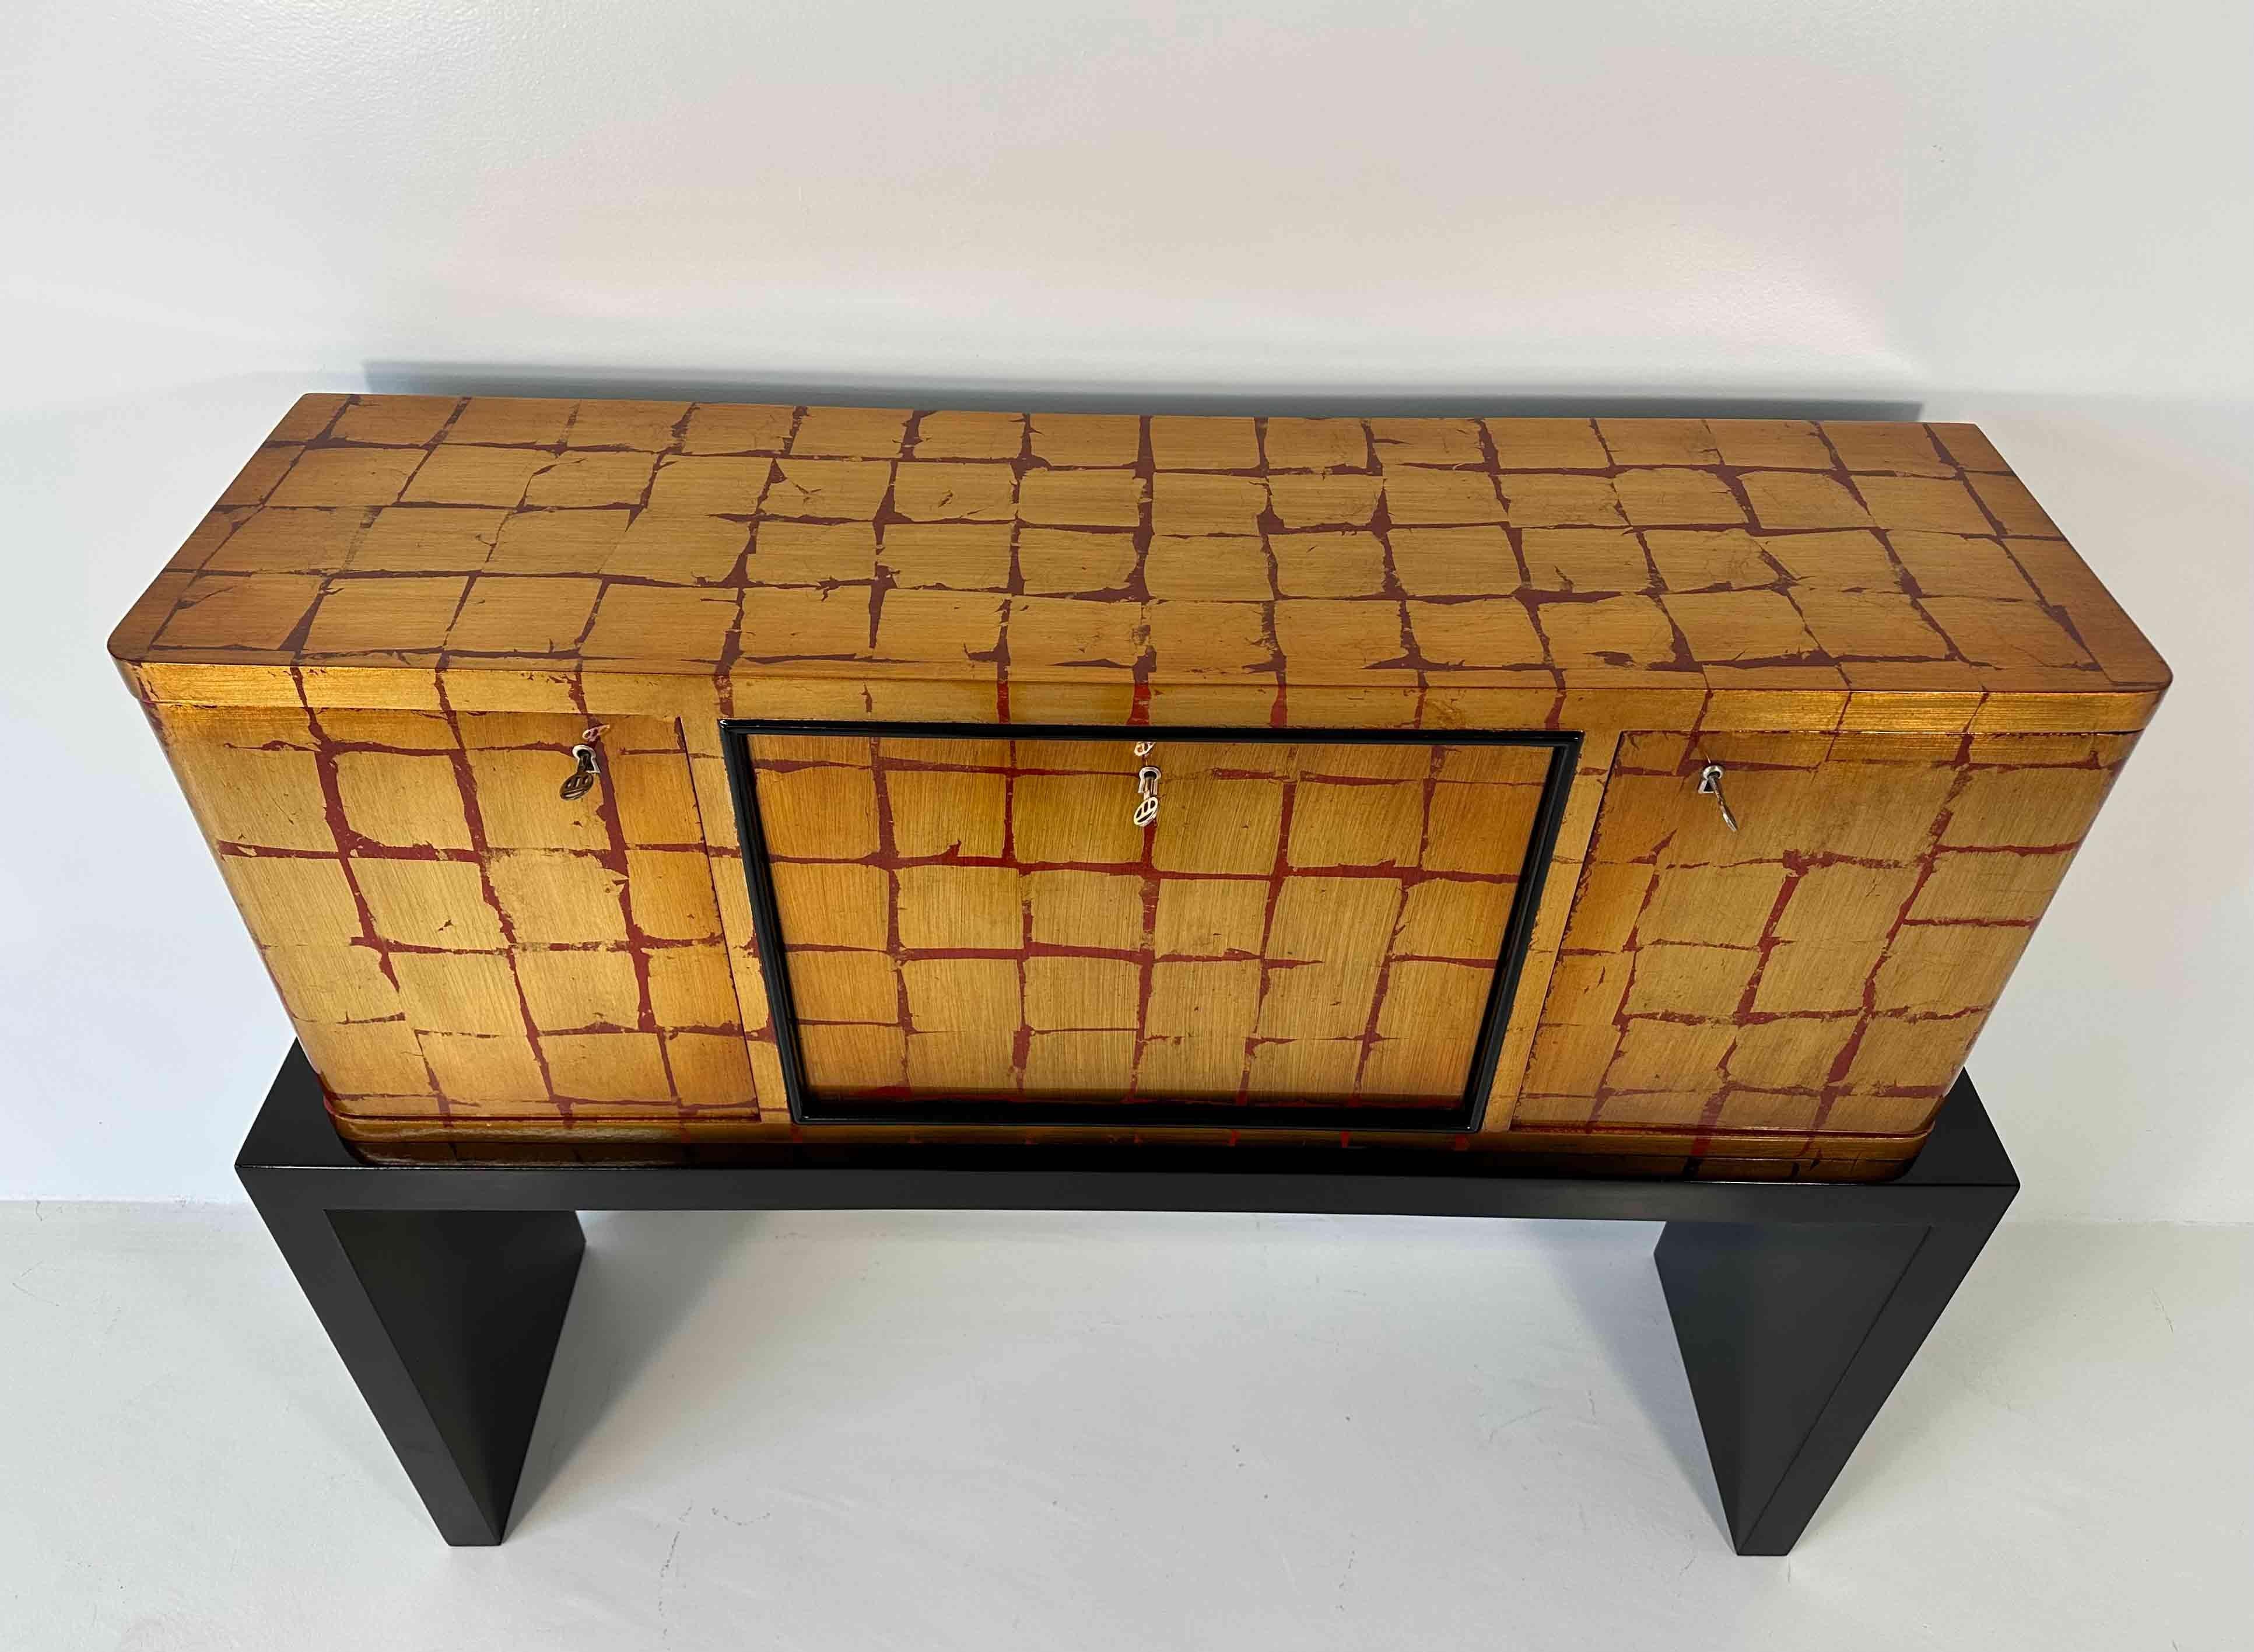 Italian Art Deco Red and Black Lacquer and Gold Leaf Cabinet, 1940s For Sale 5